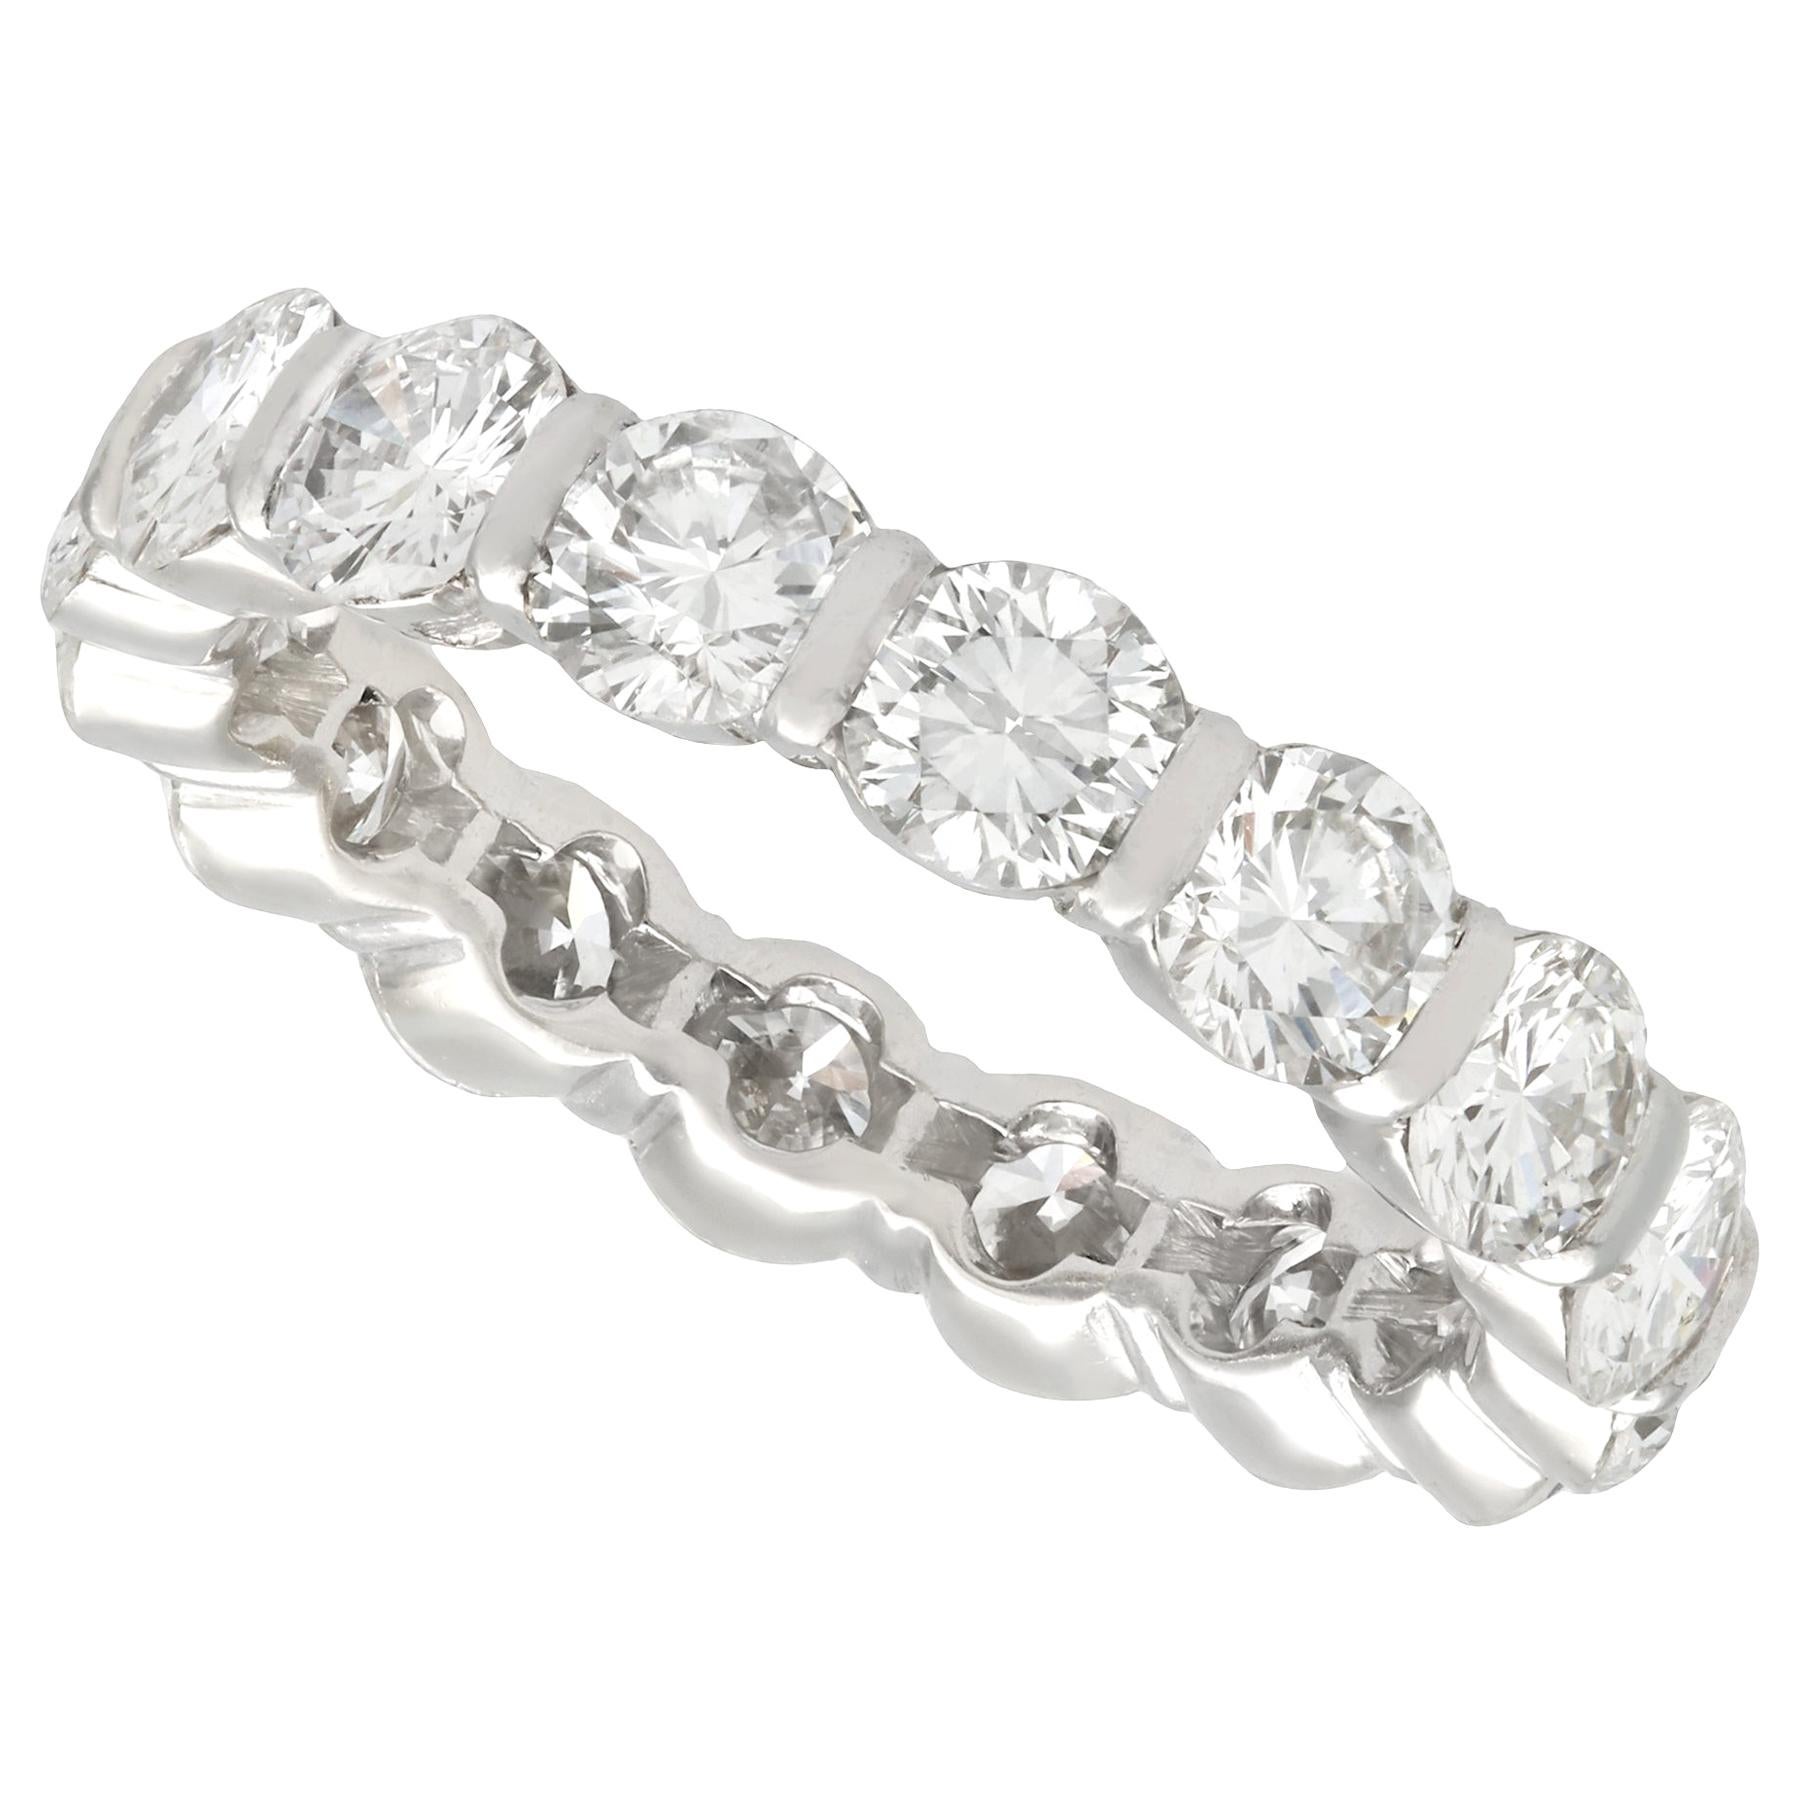 1980s Vintage French 2.88 Carat Diamond and White Gold Full Eternity Ring